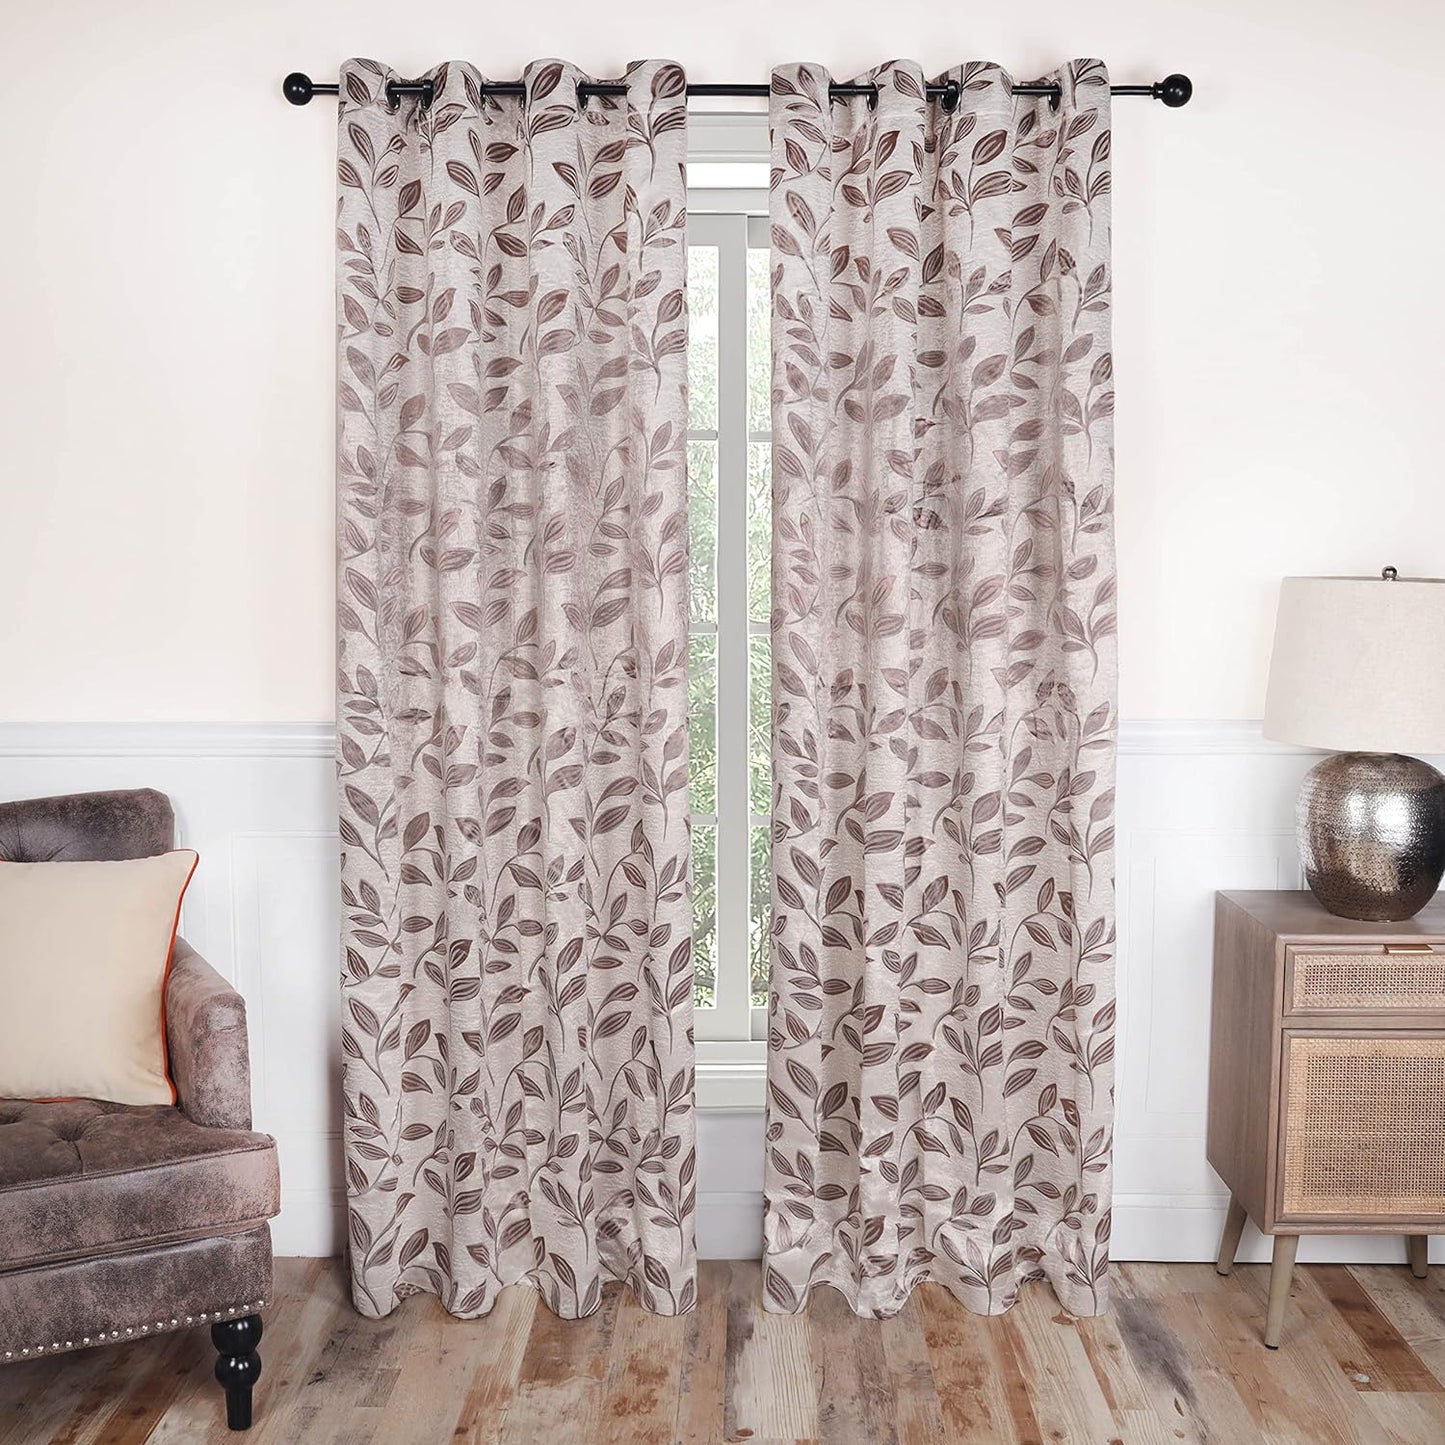 Superior Blackout Curtains, Room Darkening Window Accent for Bedroom, Sun Blocking, Thermal, Modern Bohemian Curtains, Leaves Collection, Set of 2 Panels, Rod Pocket - 52 in X 63 In, Nickel Black  Home City Inc. Espresso 52 In X 72 In (W X L) 